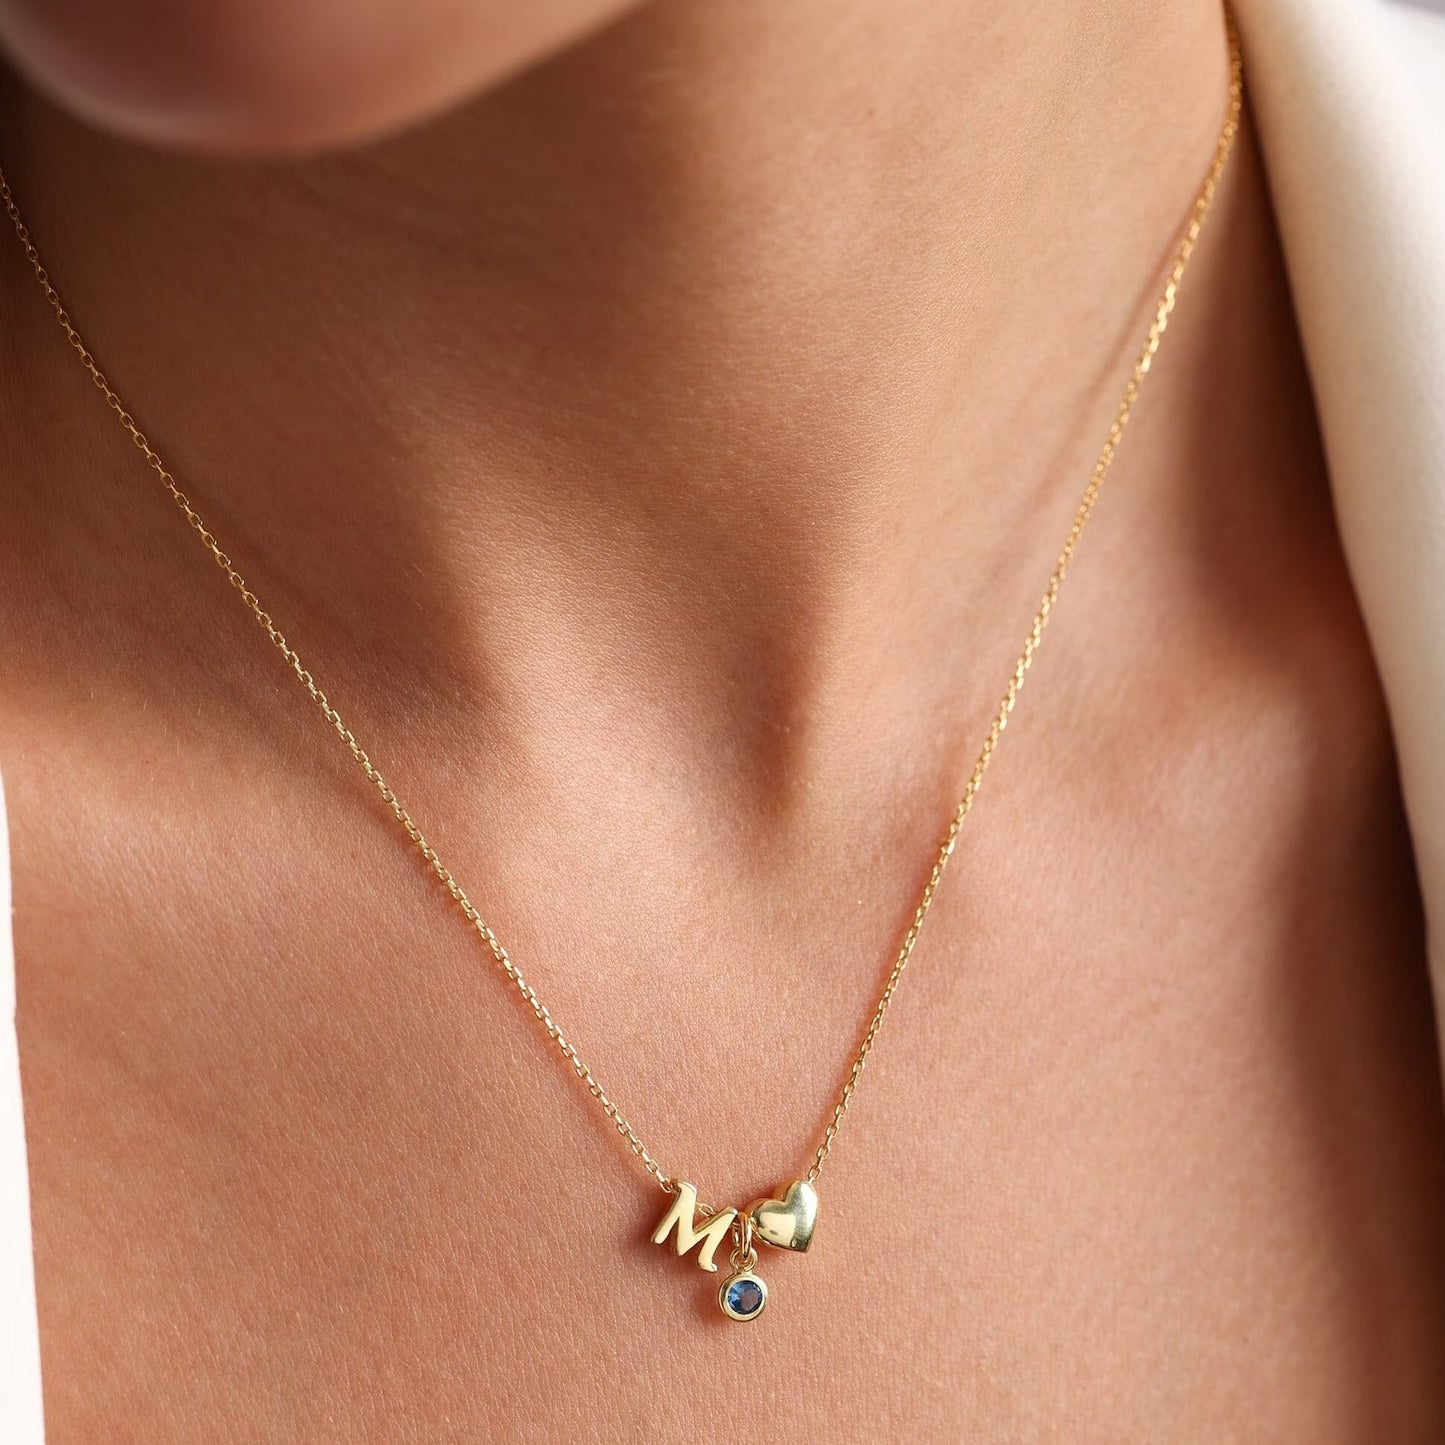 18 carat gold necklace for women - initial, heart and birthstone chain for her. Shop the finest birthday gifts for women in the UAE.